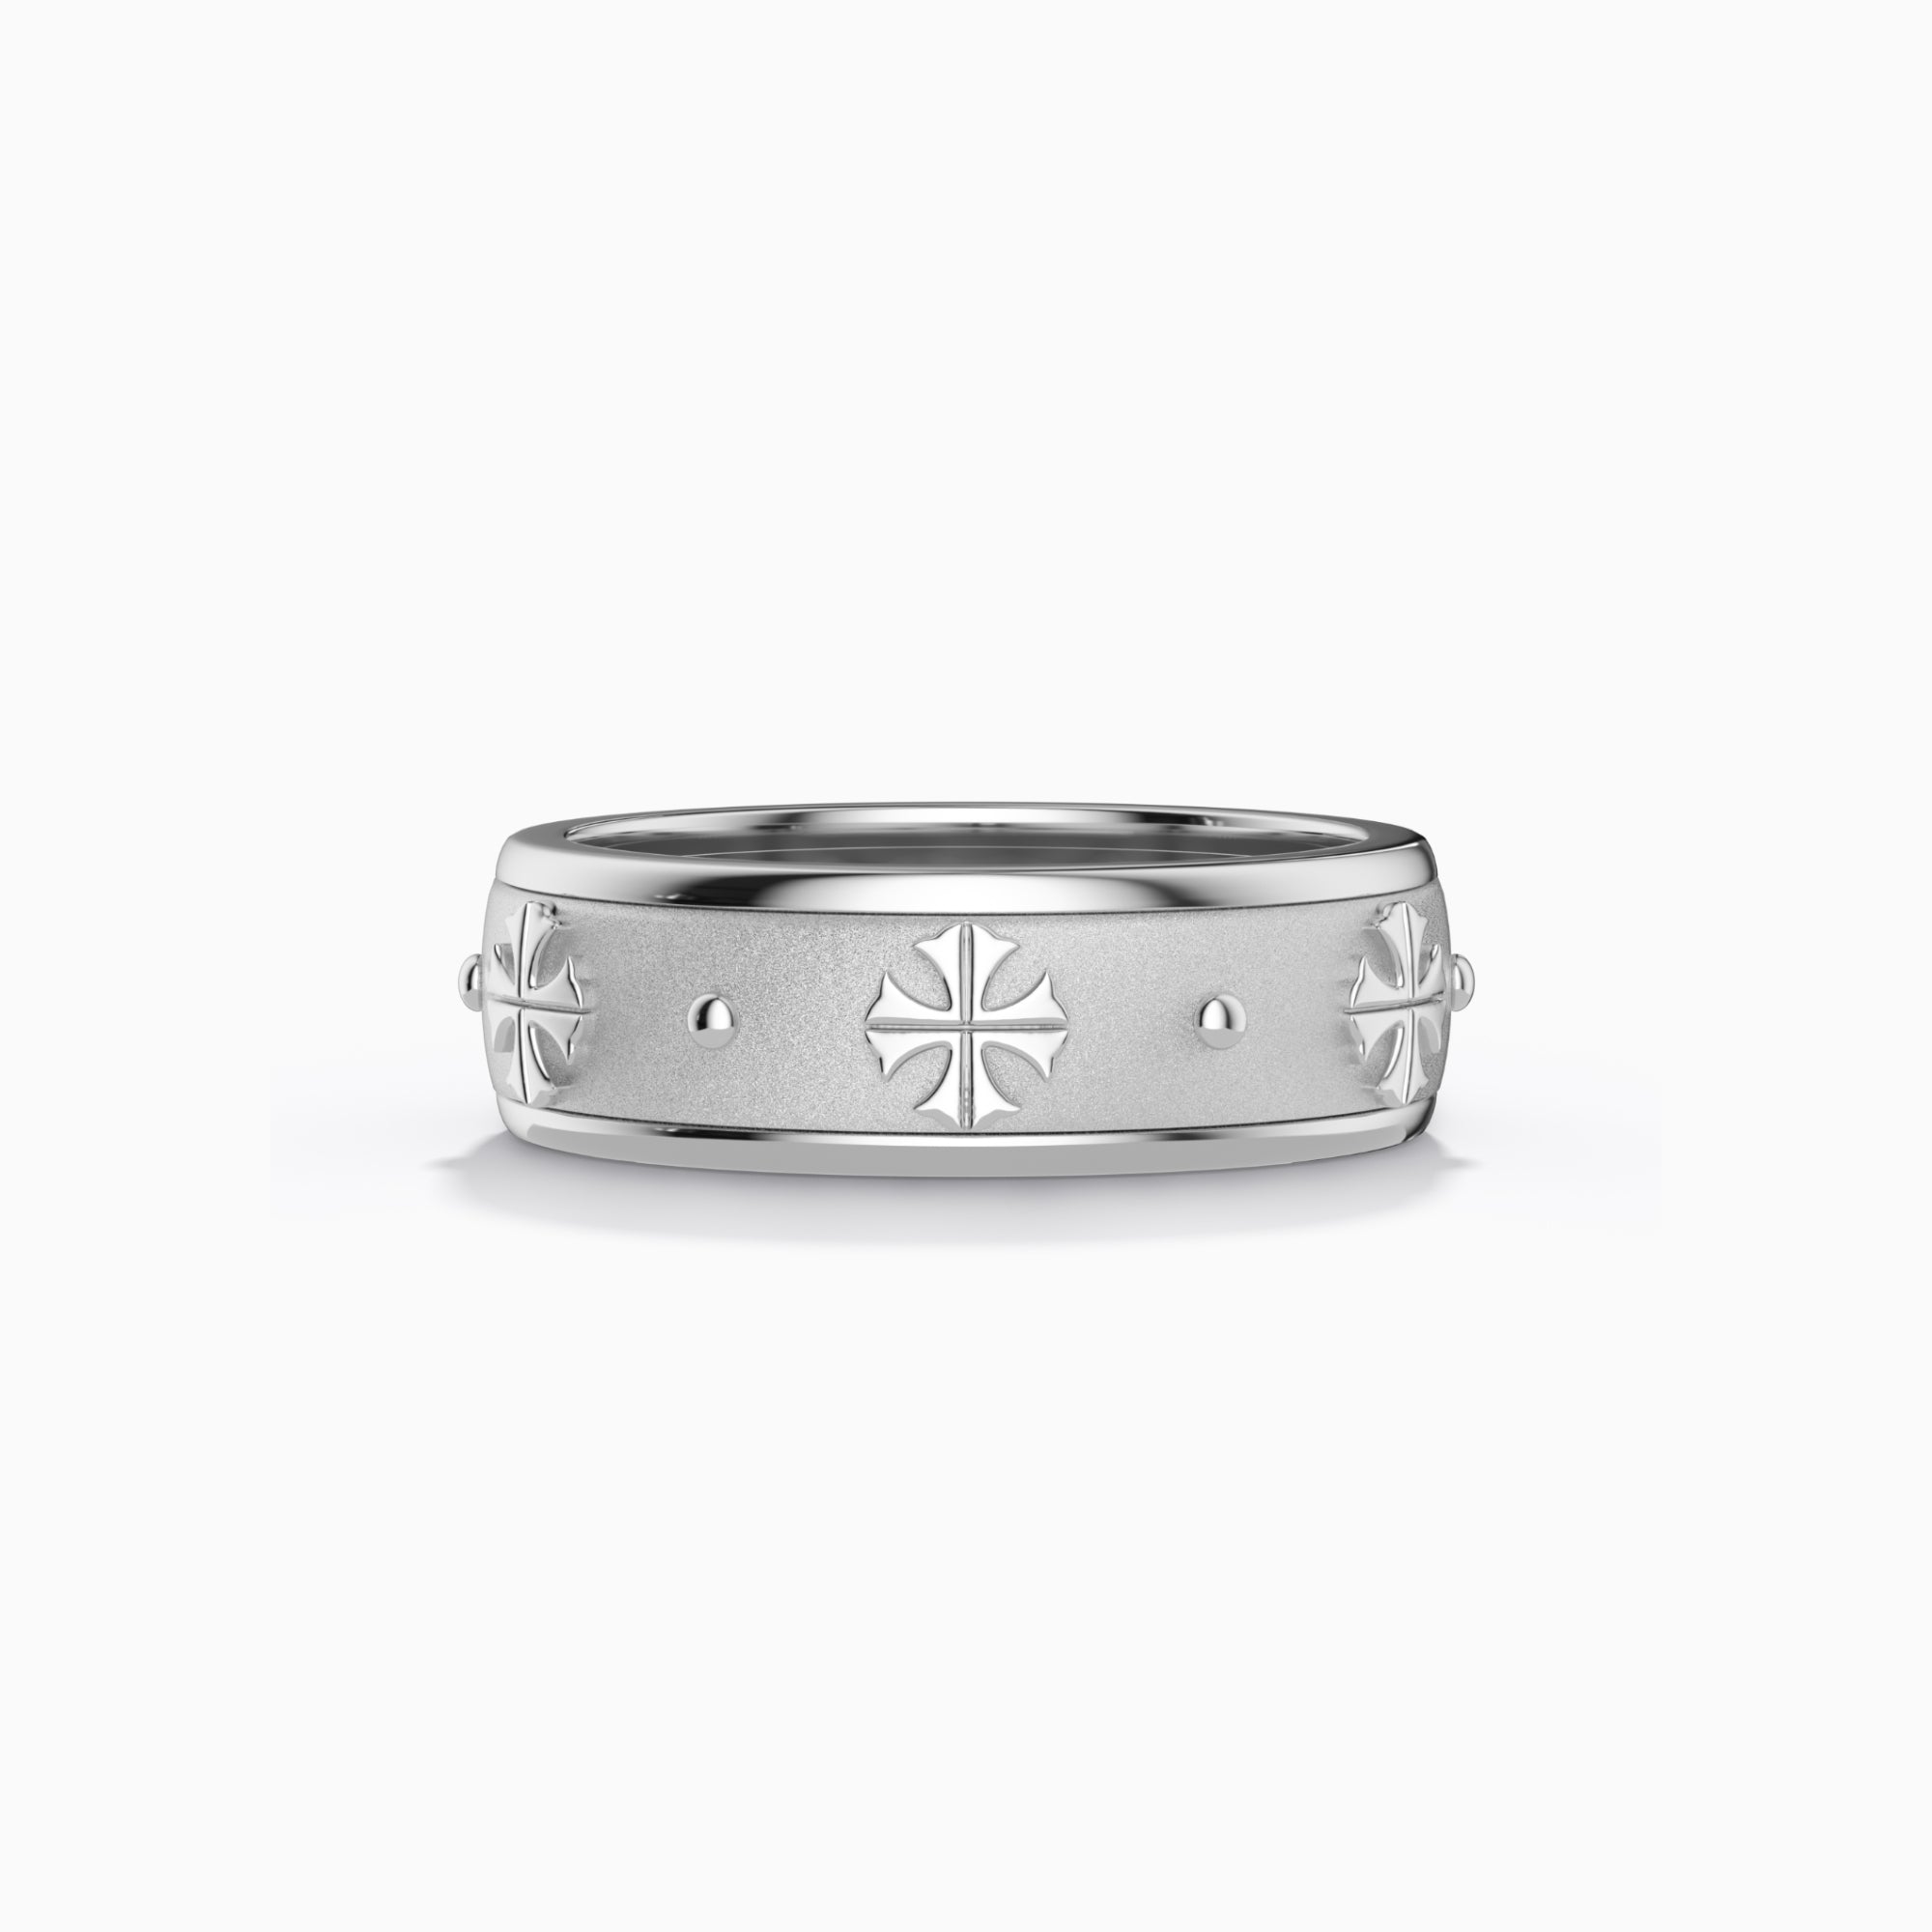 Serenity Gothic Cross Fidget Ring For Anxiety Relief - vanimy